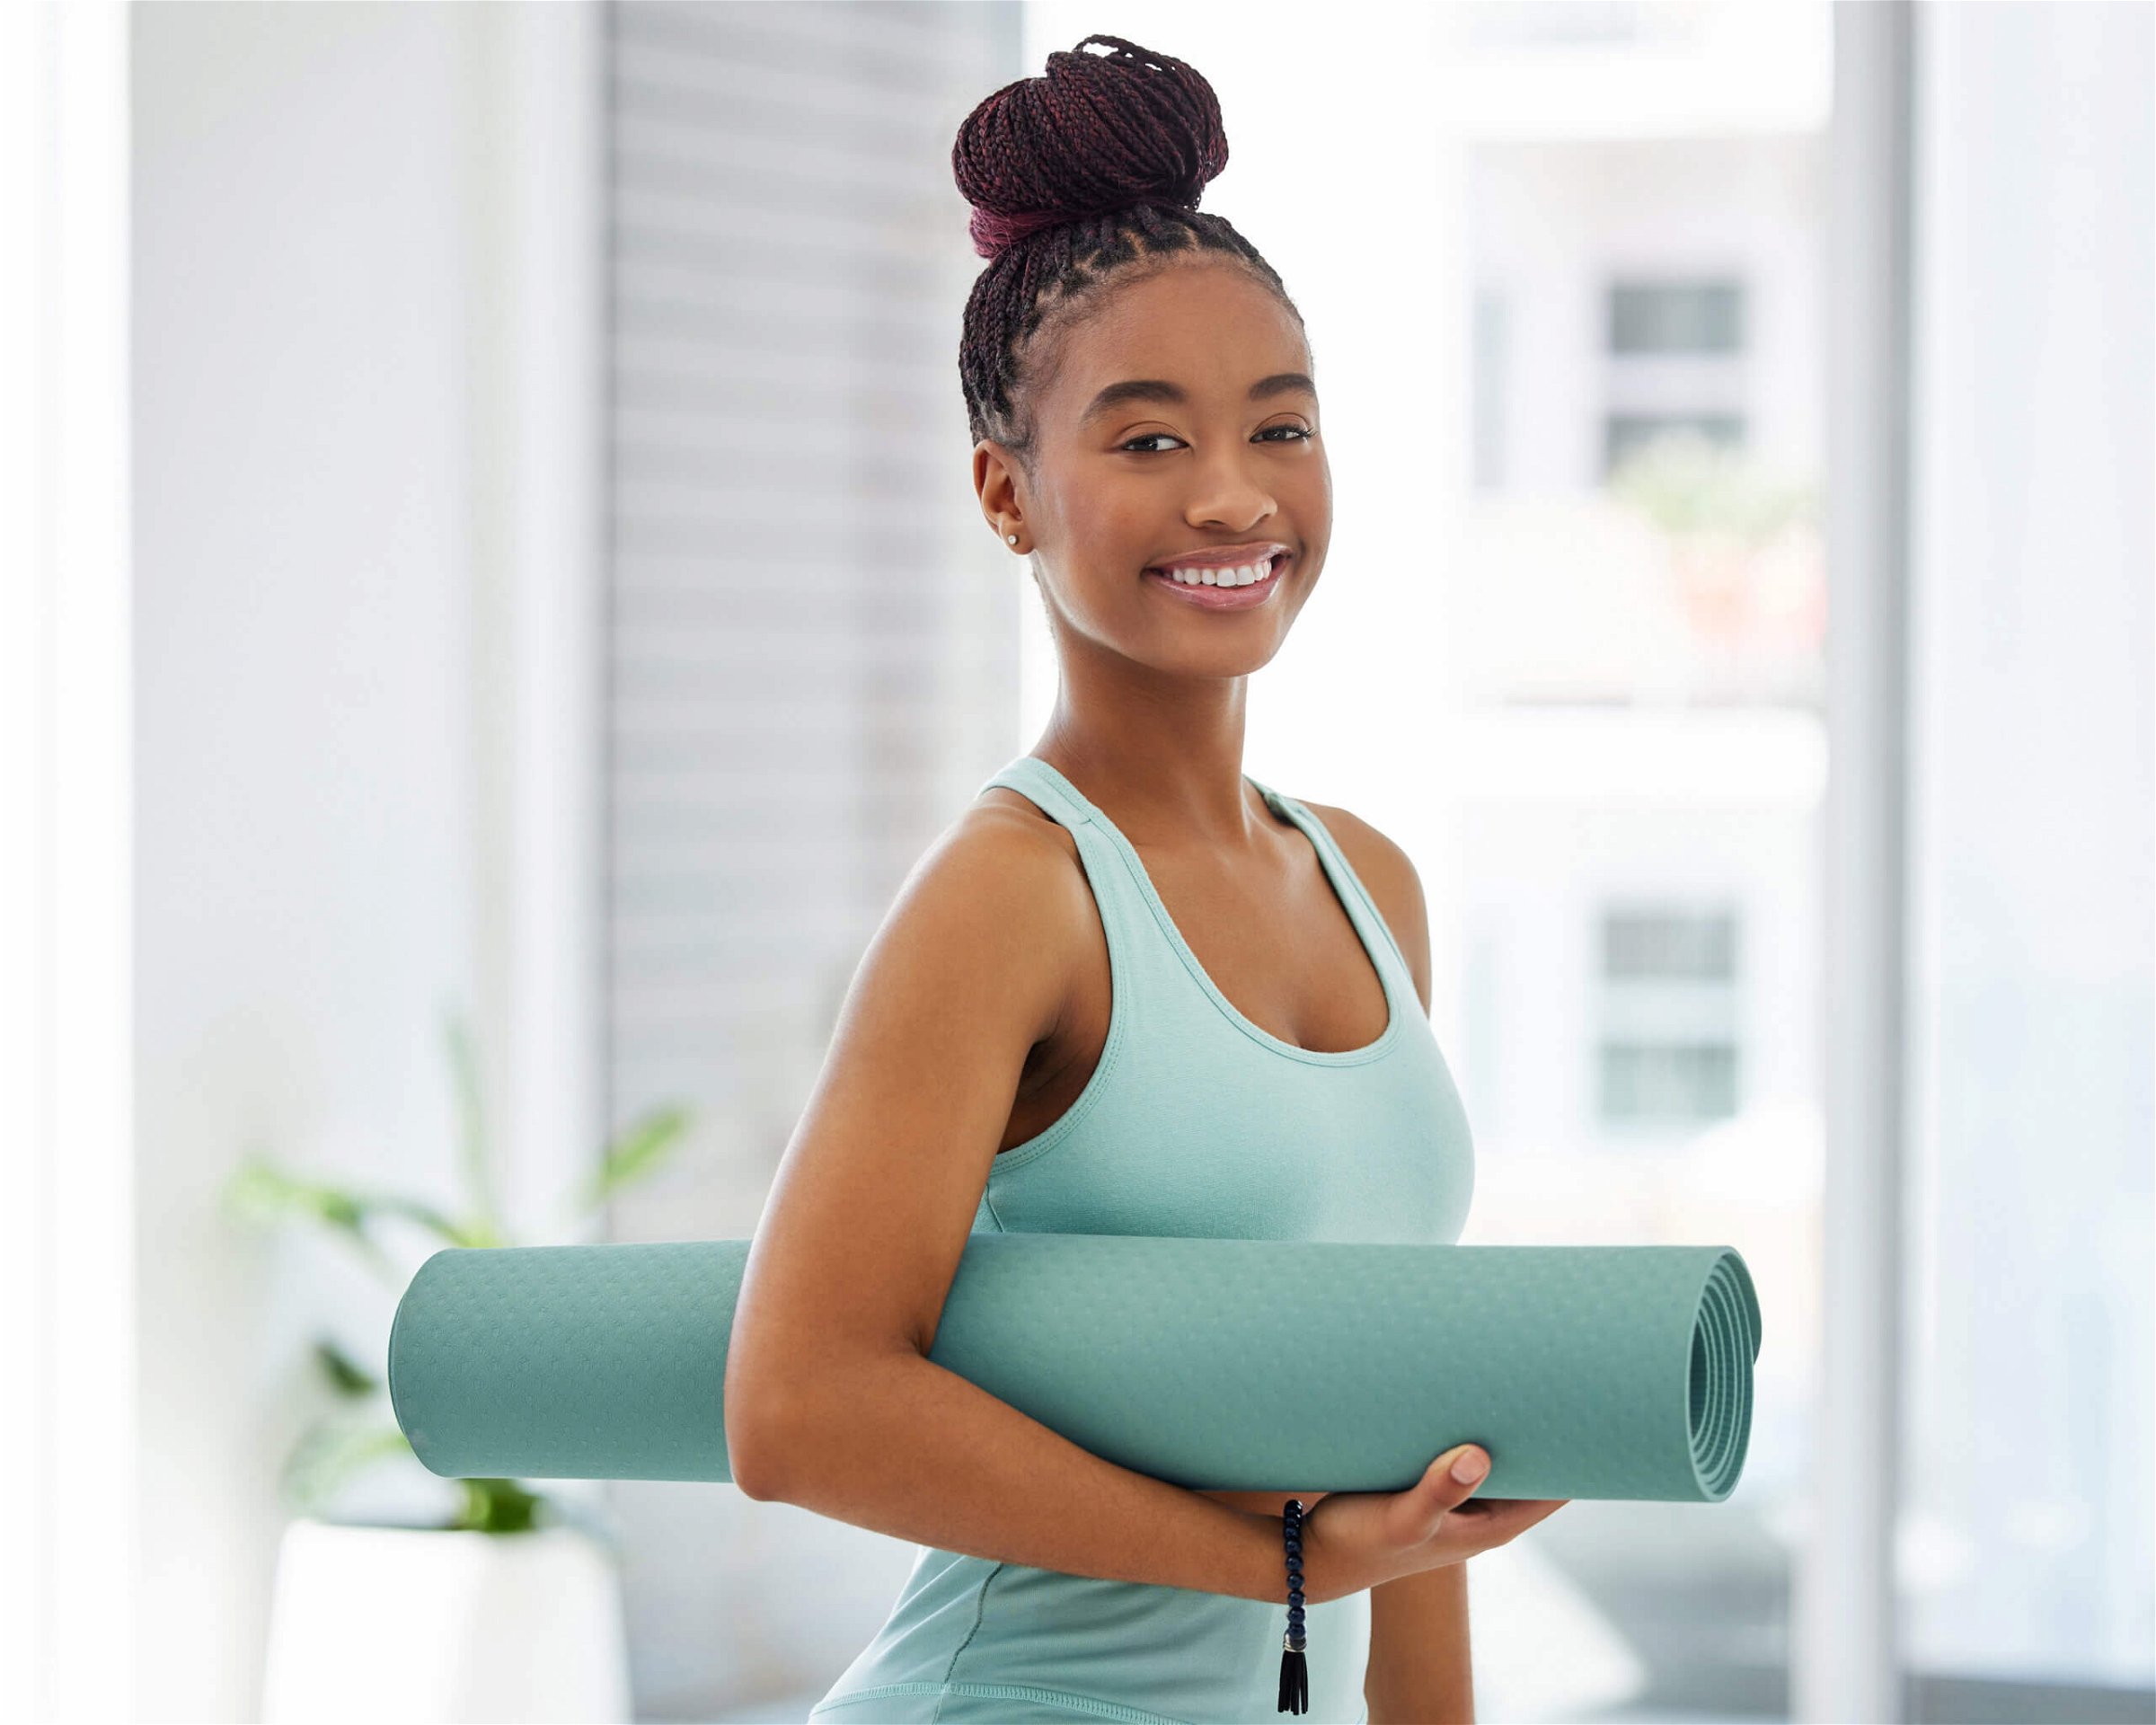 Shot of an attractive young woman standing alone and holding a yoga mat in a studio.